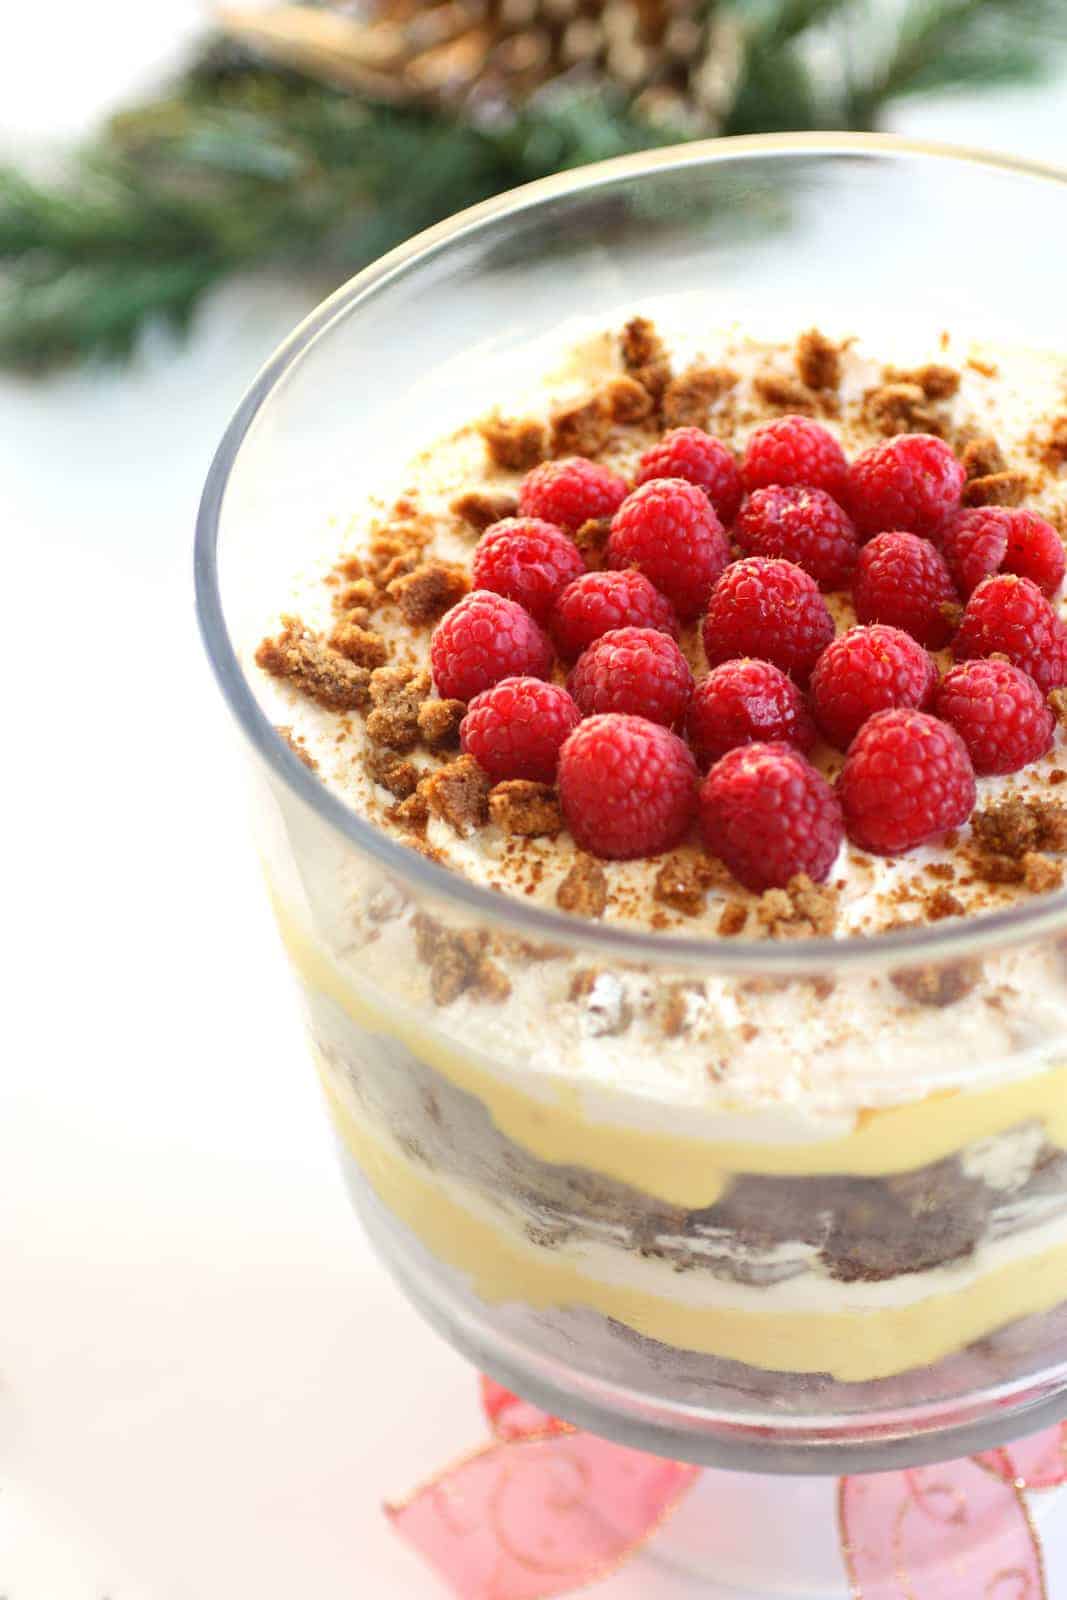 Eggnog Gingerbread Trifle - layers of gingerbread, eggnog pudding and whipped cream. So good! the-girl-who-ate-everything.com